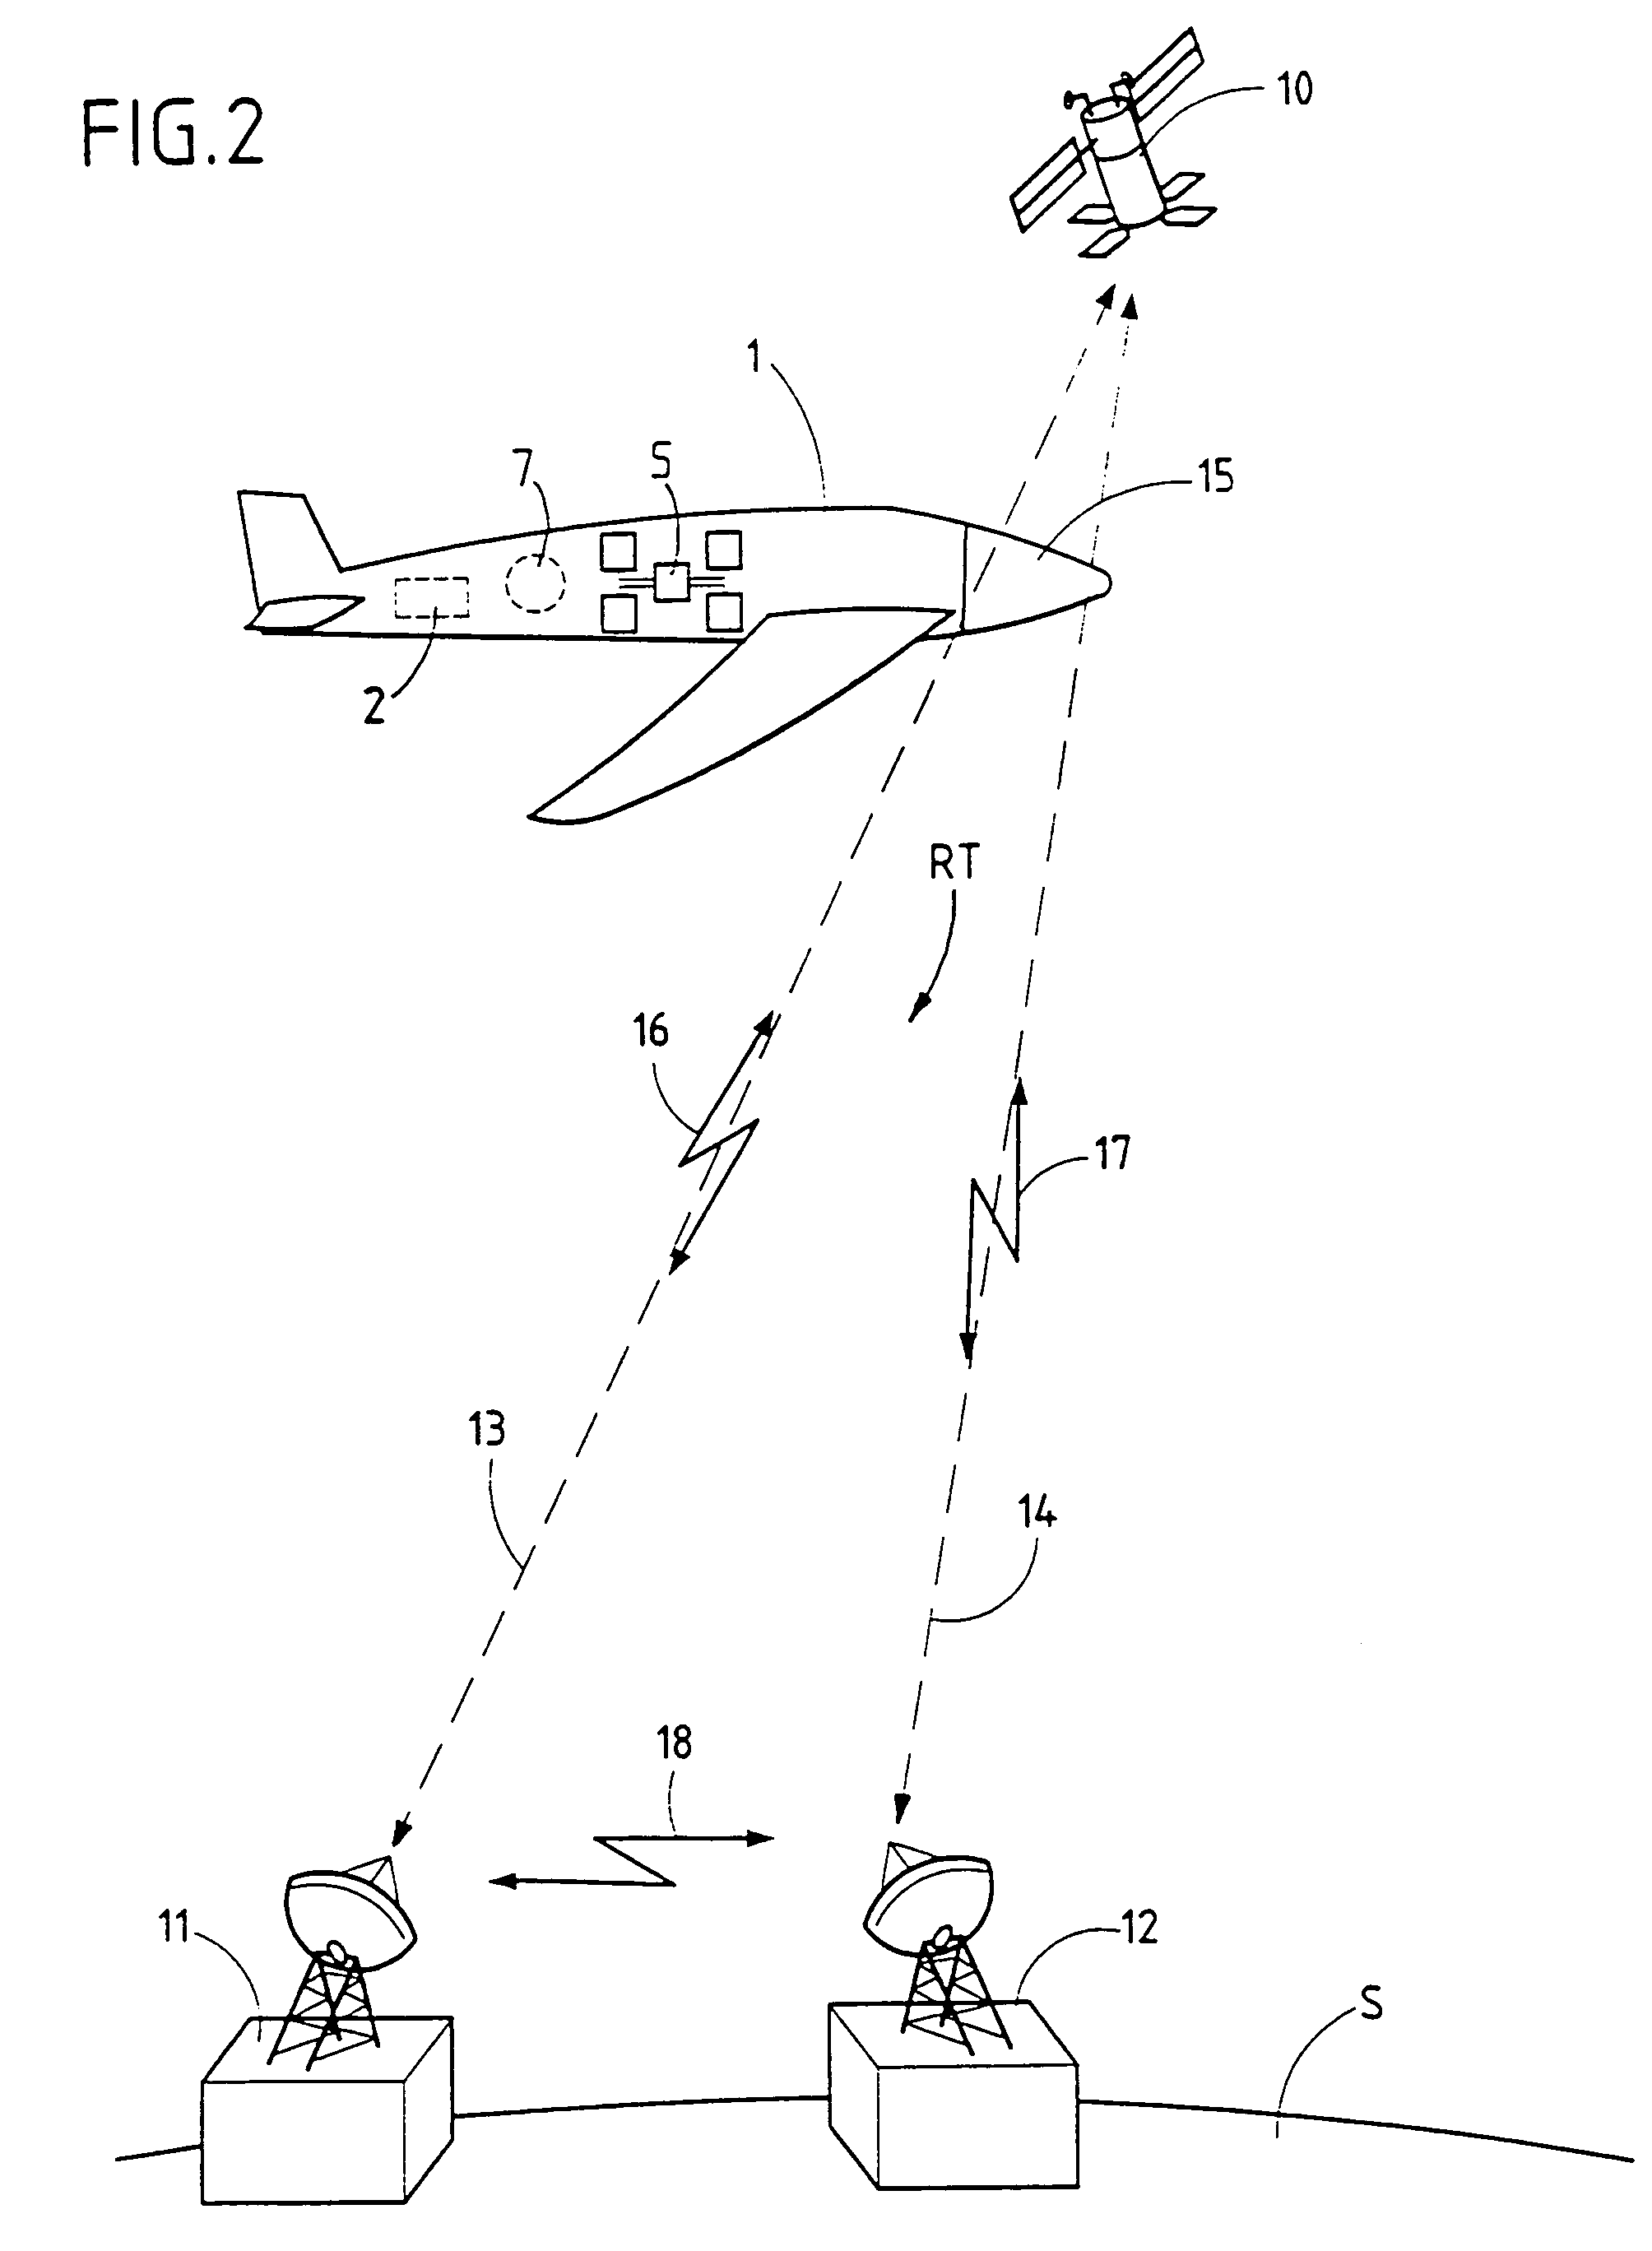 High altitude airborne craft used as radio relay and method for placing said airborne craft on station